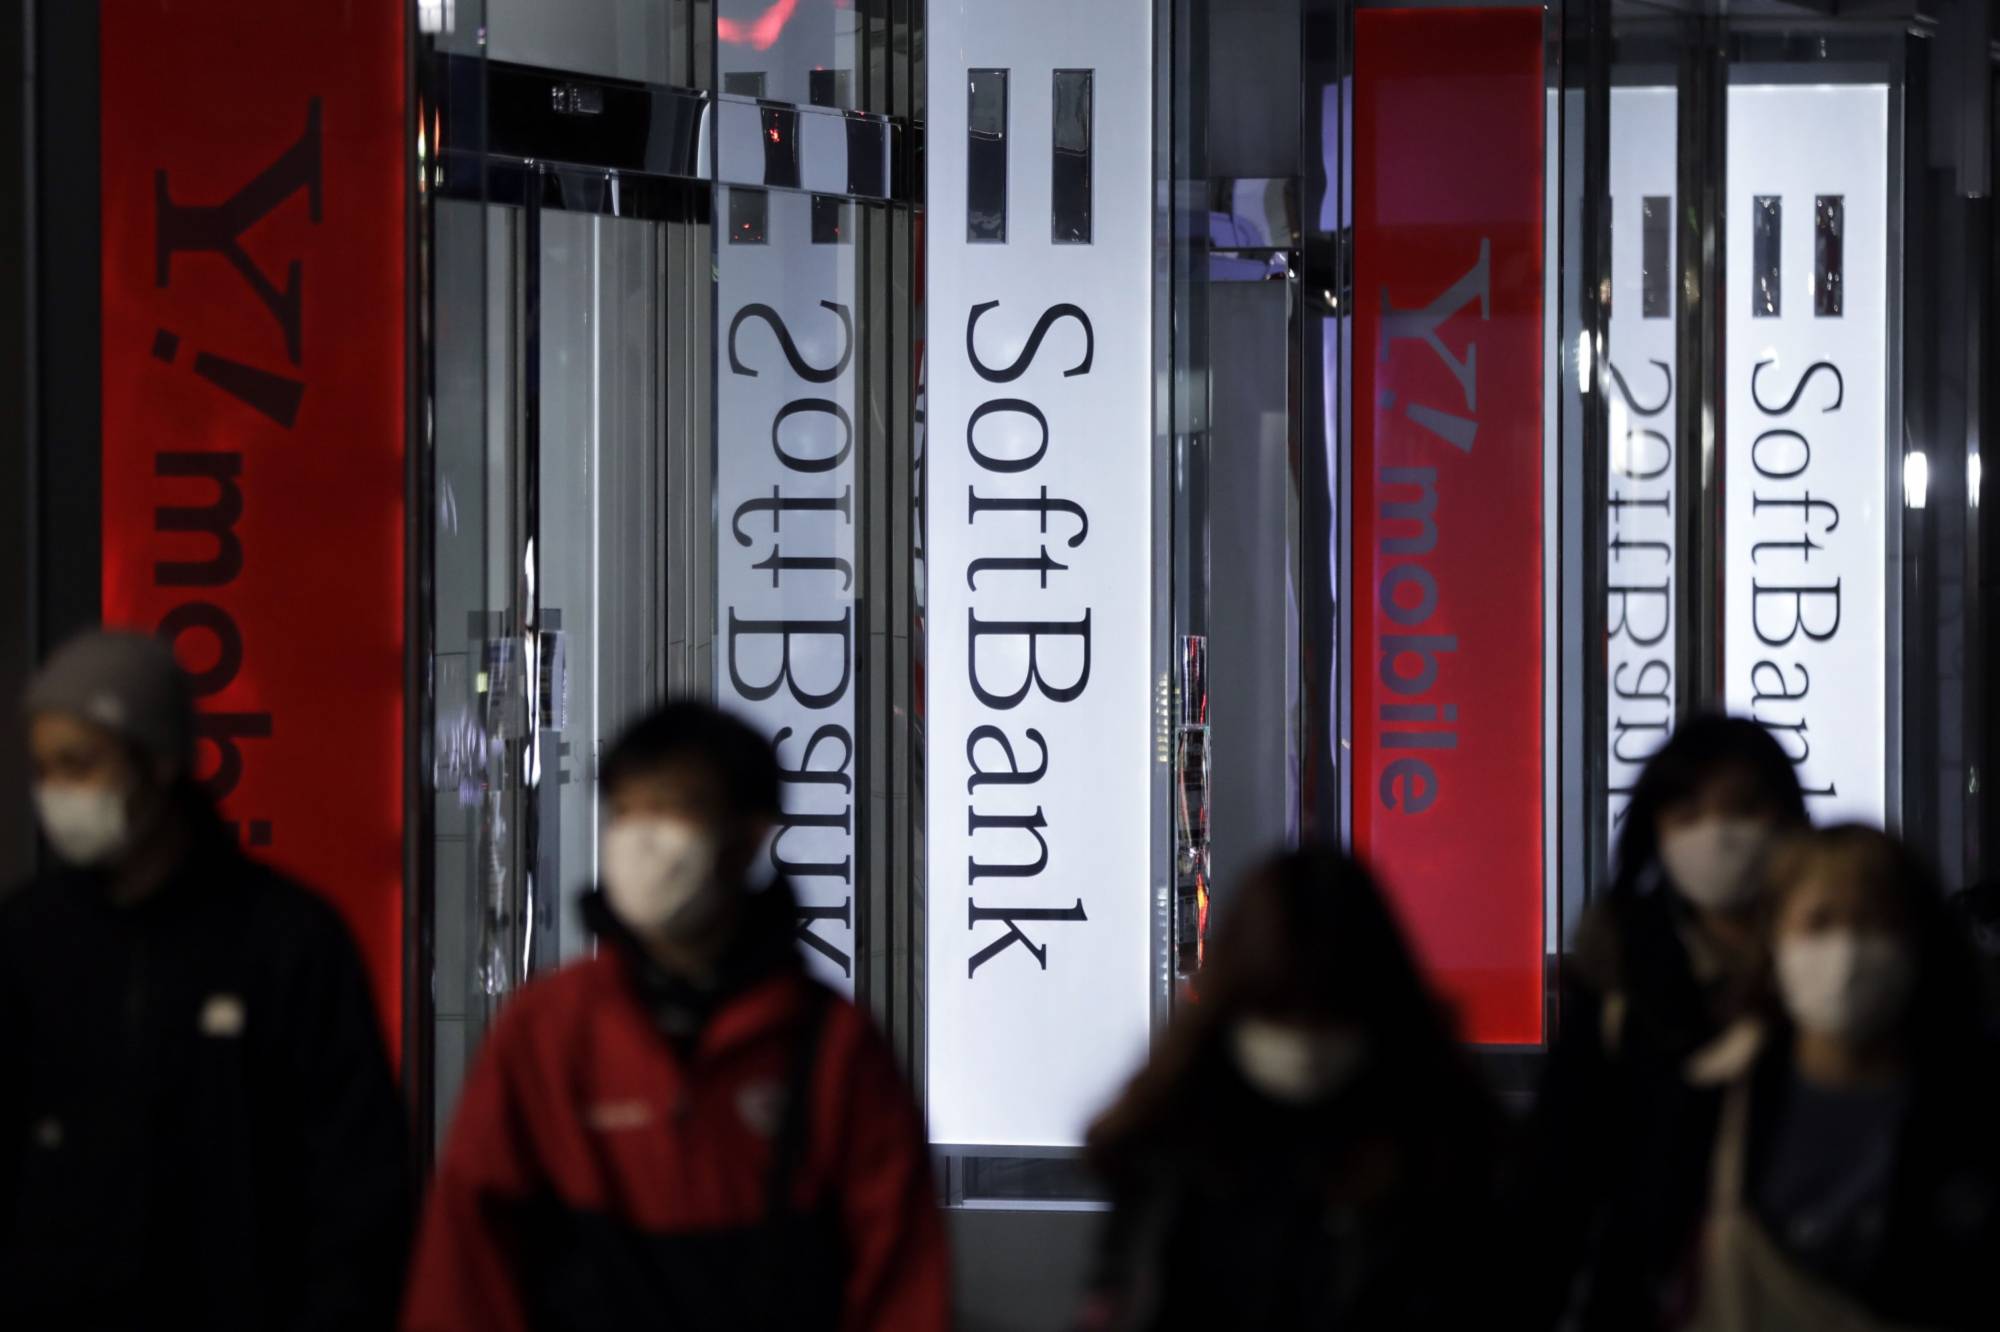 A former SoftBank Corp. employee has been arrested on suspicion of illegally disclosing 5G trade secrets to his new employer, Rakuten Mobile Inc. | BLOOMBERG